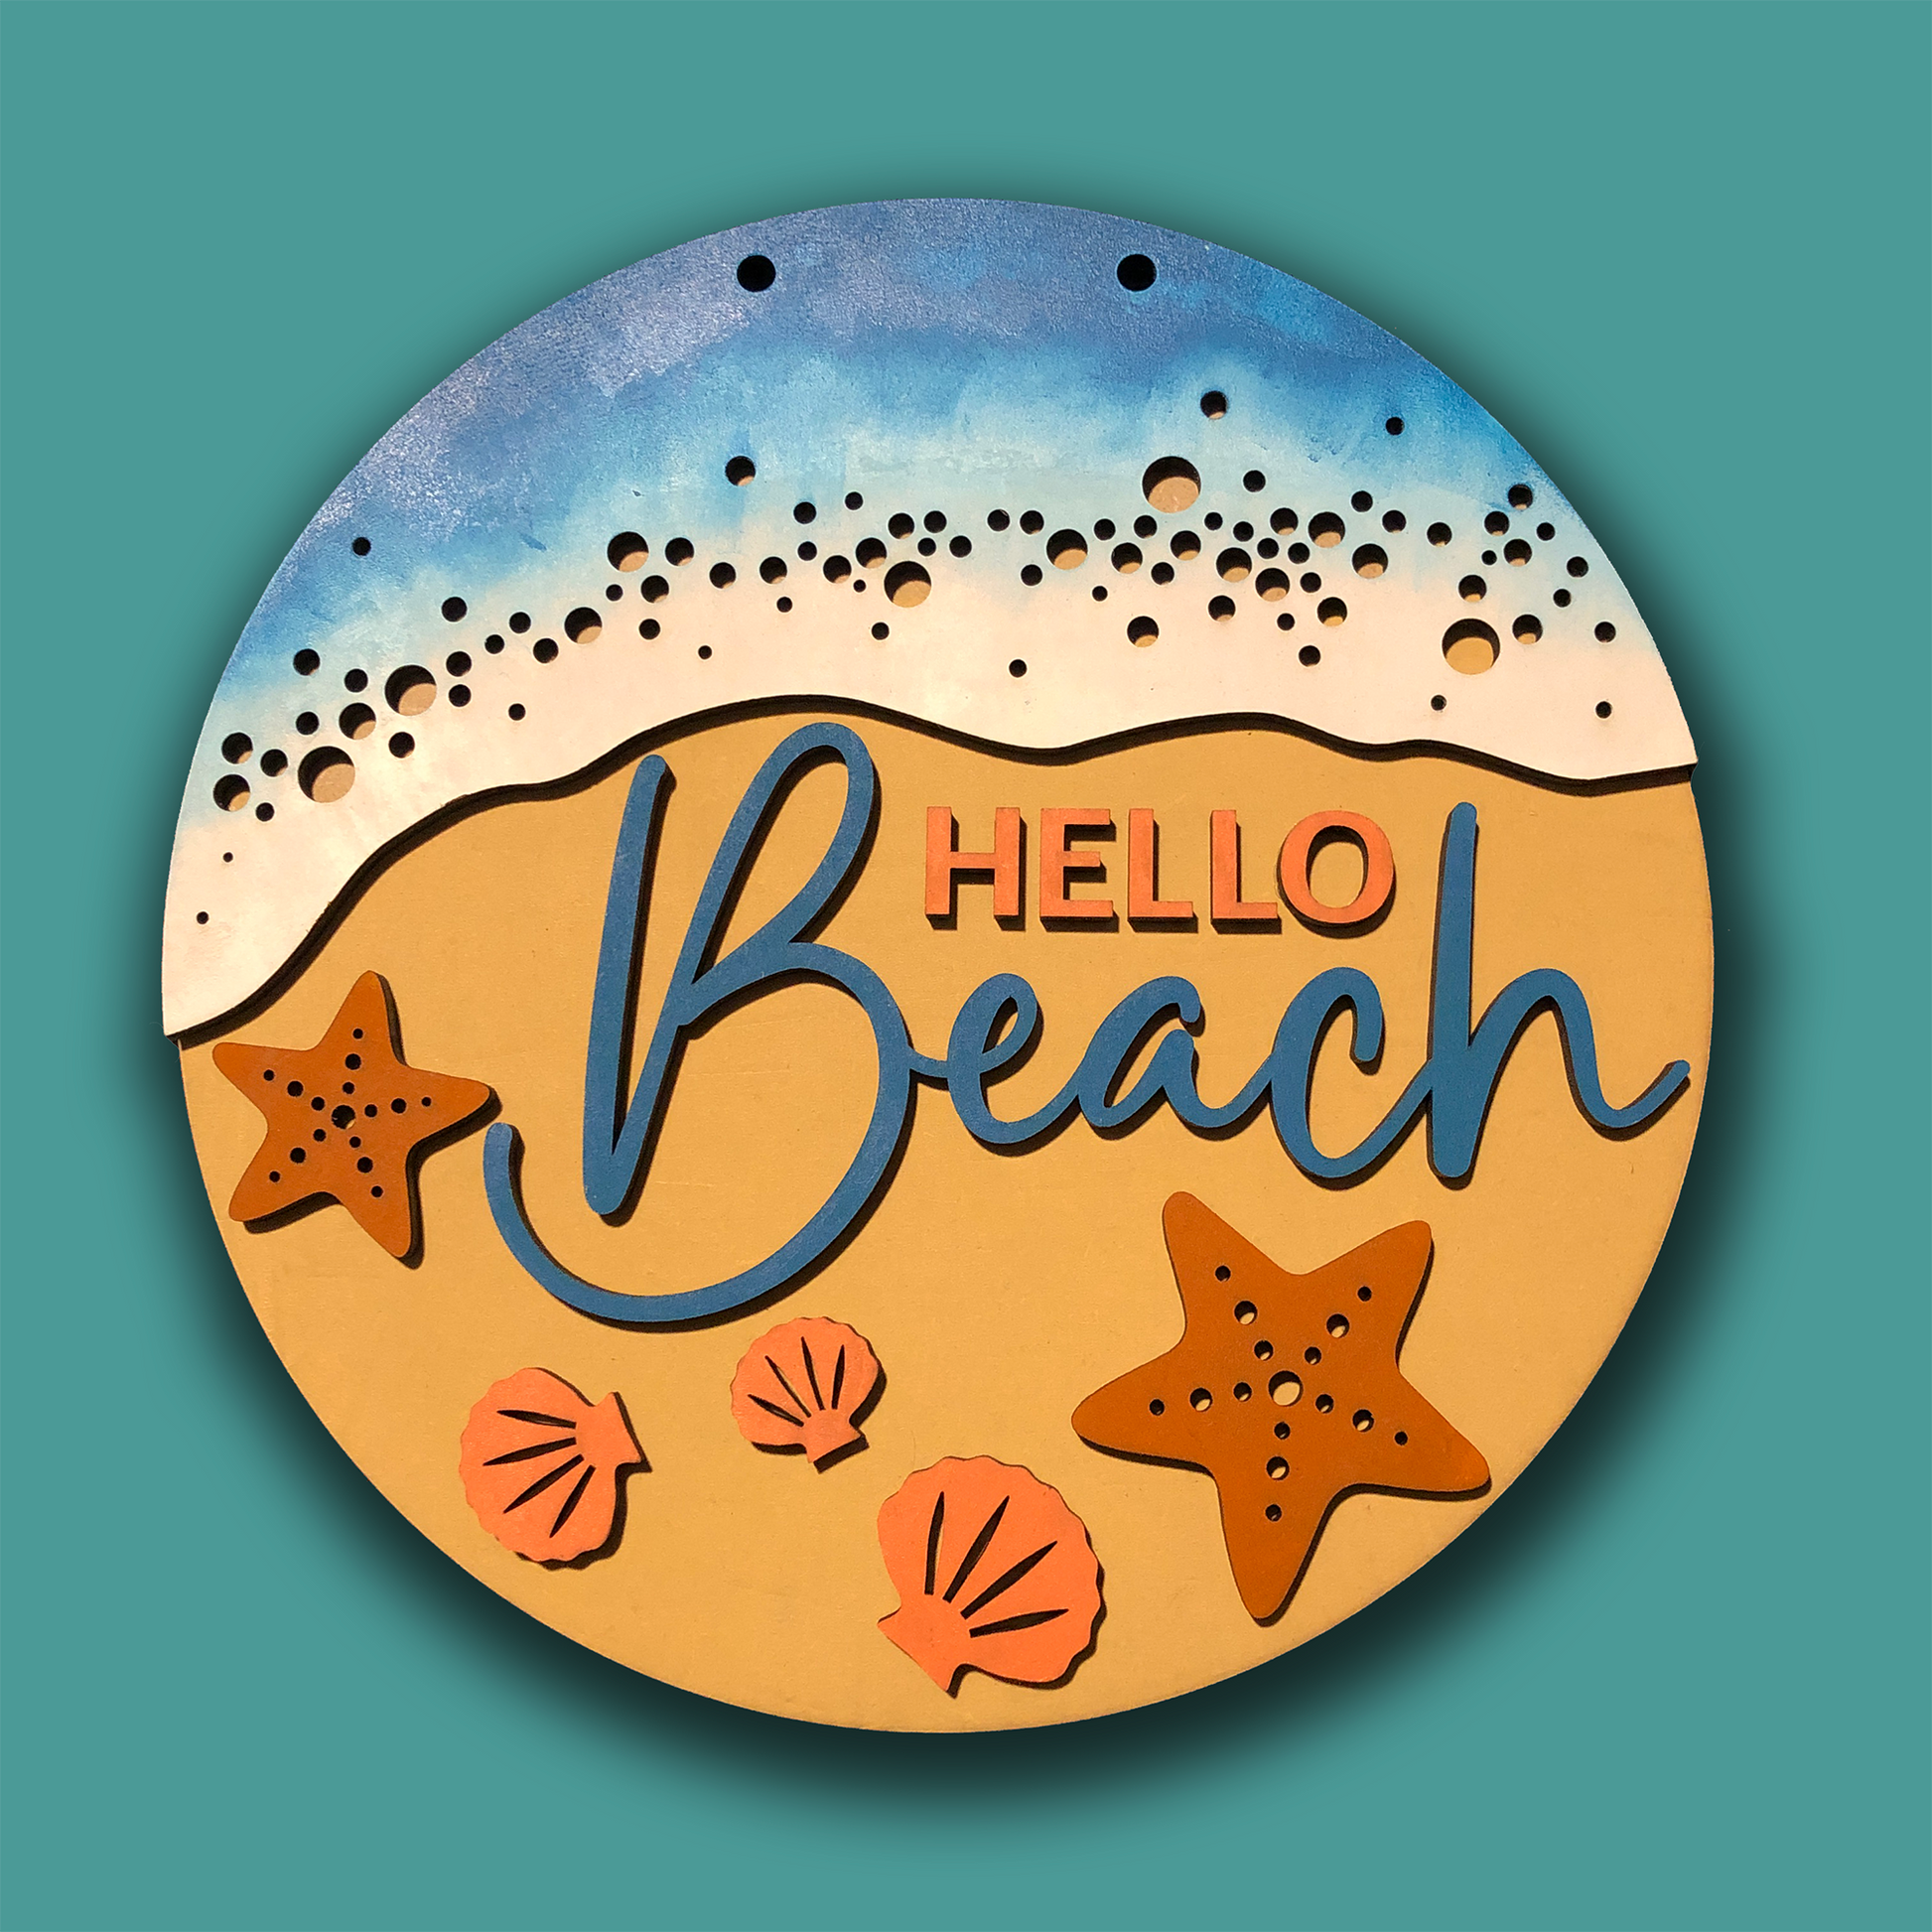 Hello Beach sign with 3D layered effect